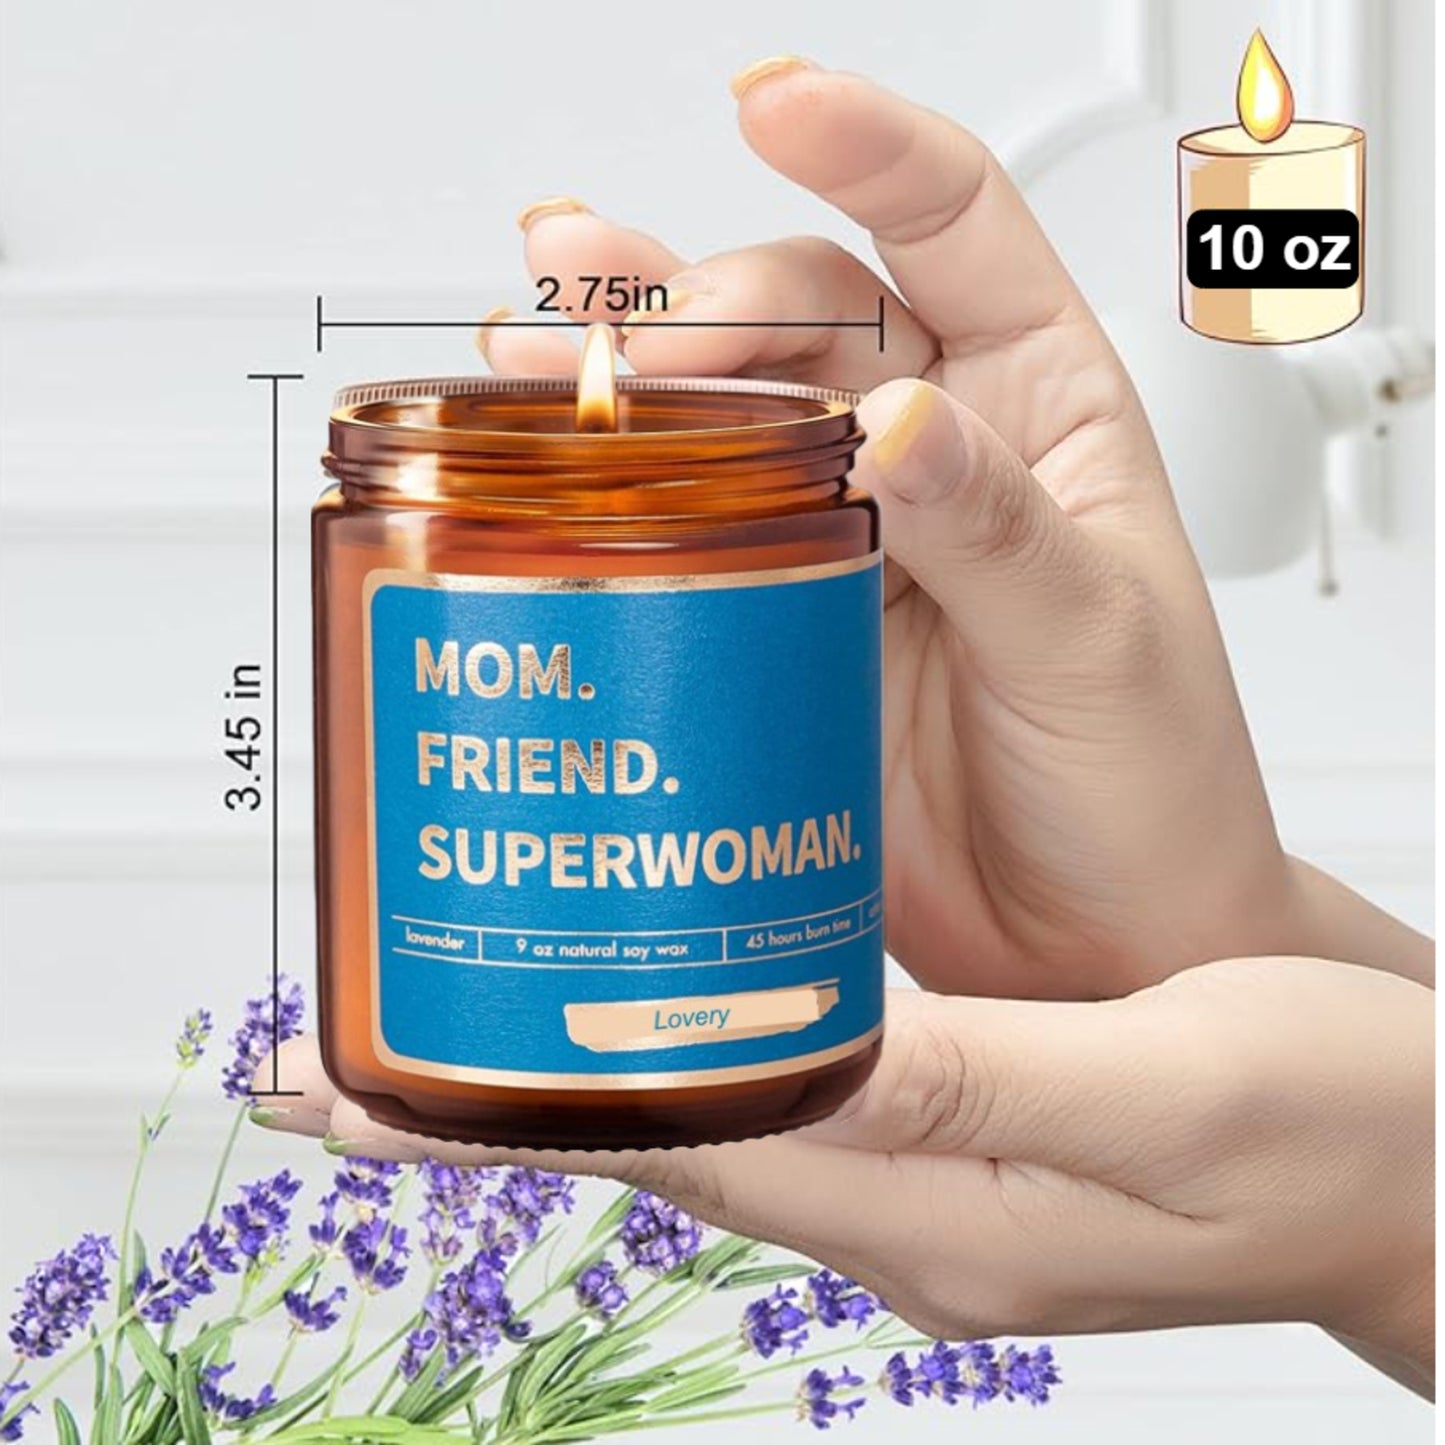 "Mom, Friend, Superwoman" Candles - 9oz Lavender Scented Soy Wax Candle